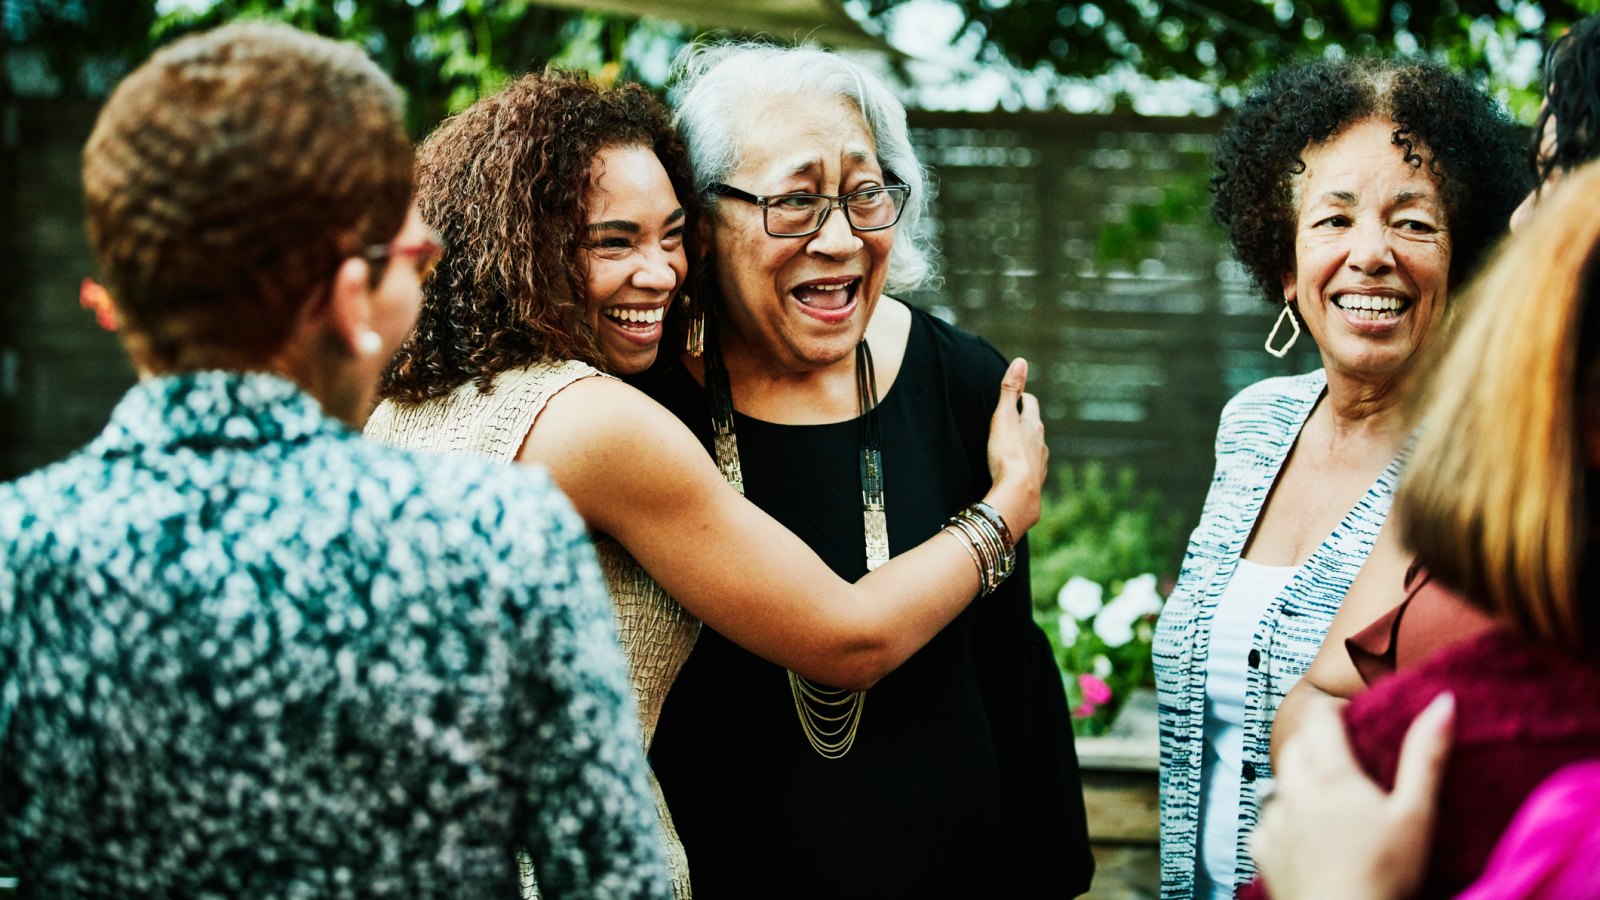 Mature daughter embracing senior mother after outdoor family dinner party